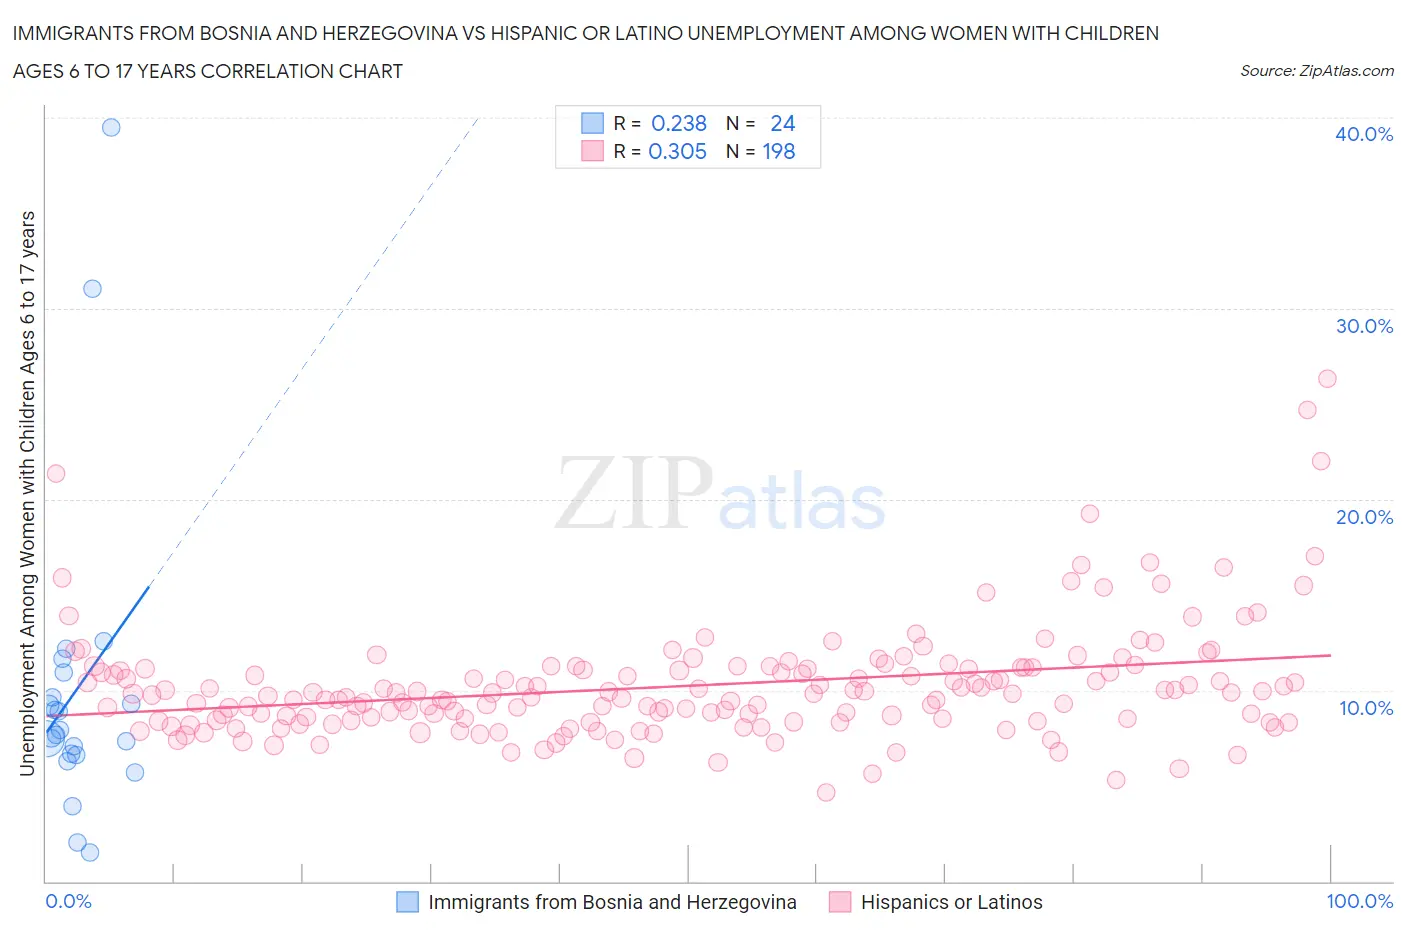 Immigrants from Bosnia and Herzegovina vs Hispanic or Latino Unemployment Among Women with Children Ages 6 to 17 years